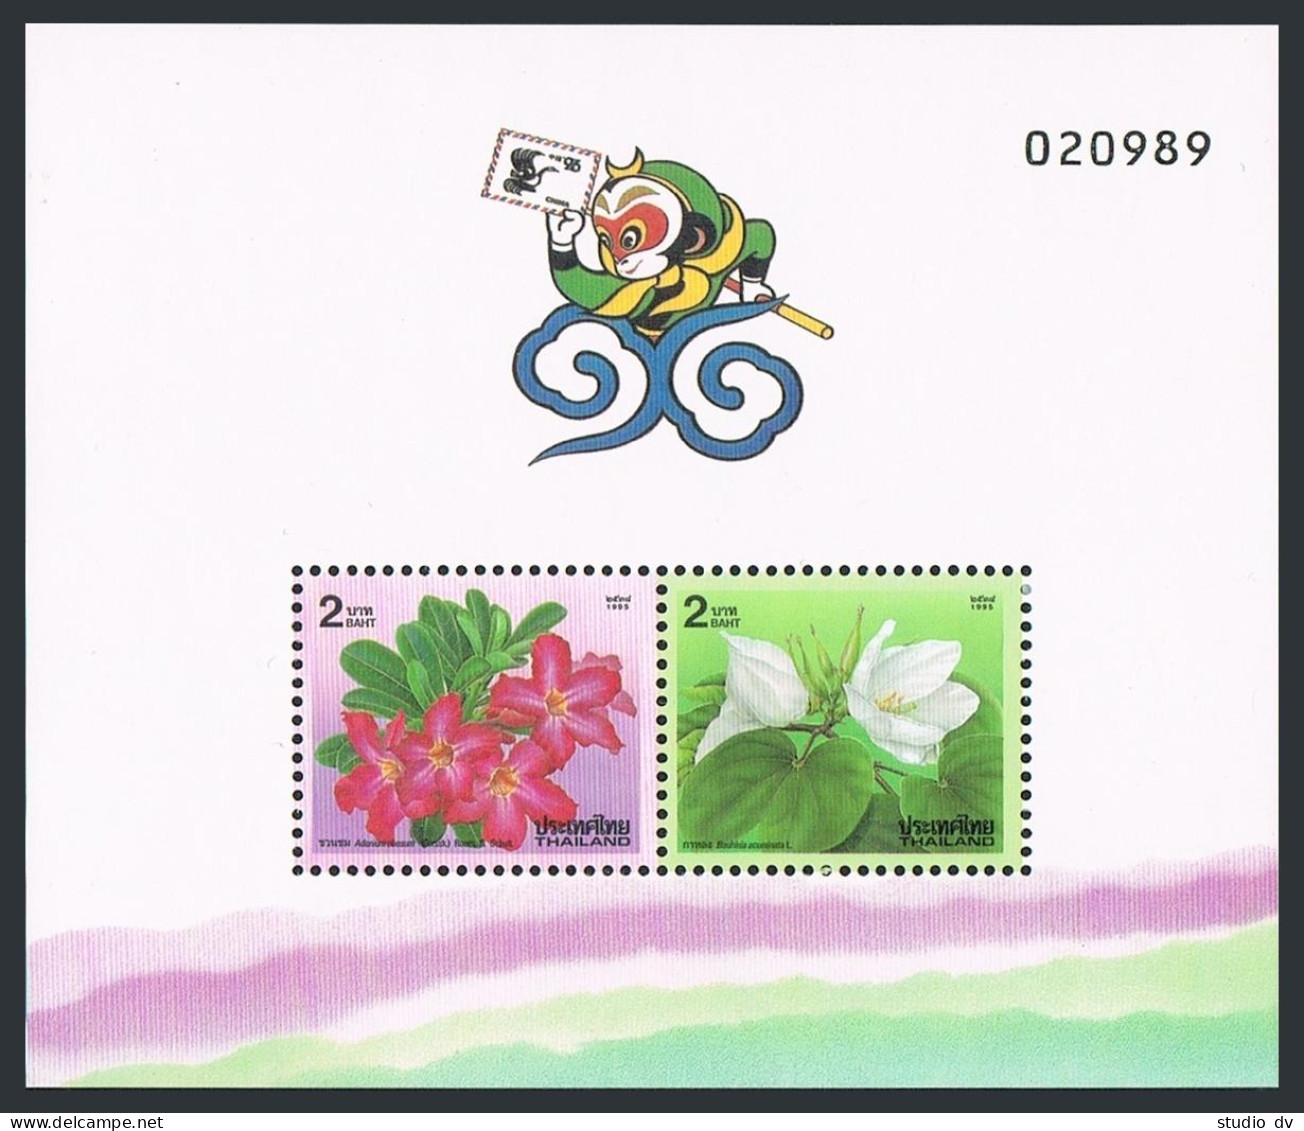 Thailand 1635a,1637c Sheets,MNH.Michel Bl.69AA-69AB. New Year 1996,Flowers. - Thailand